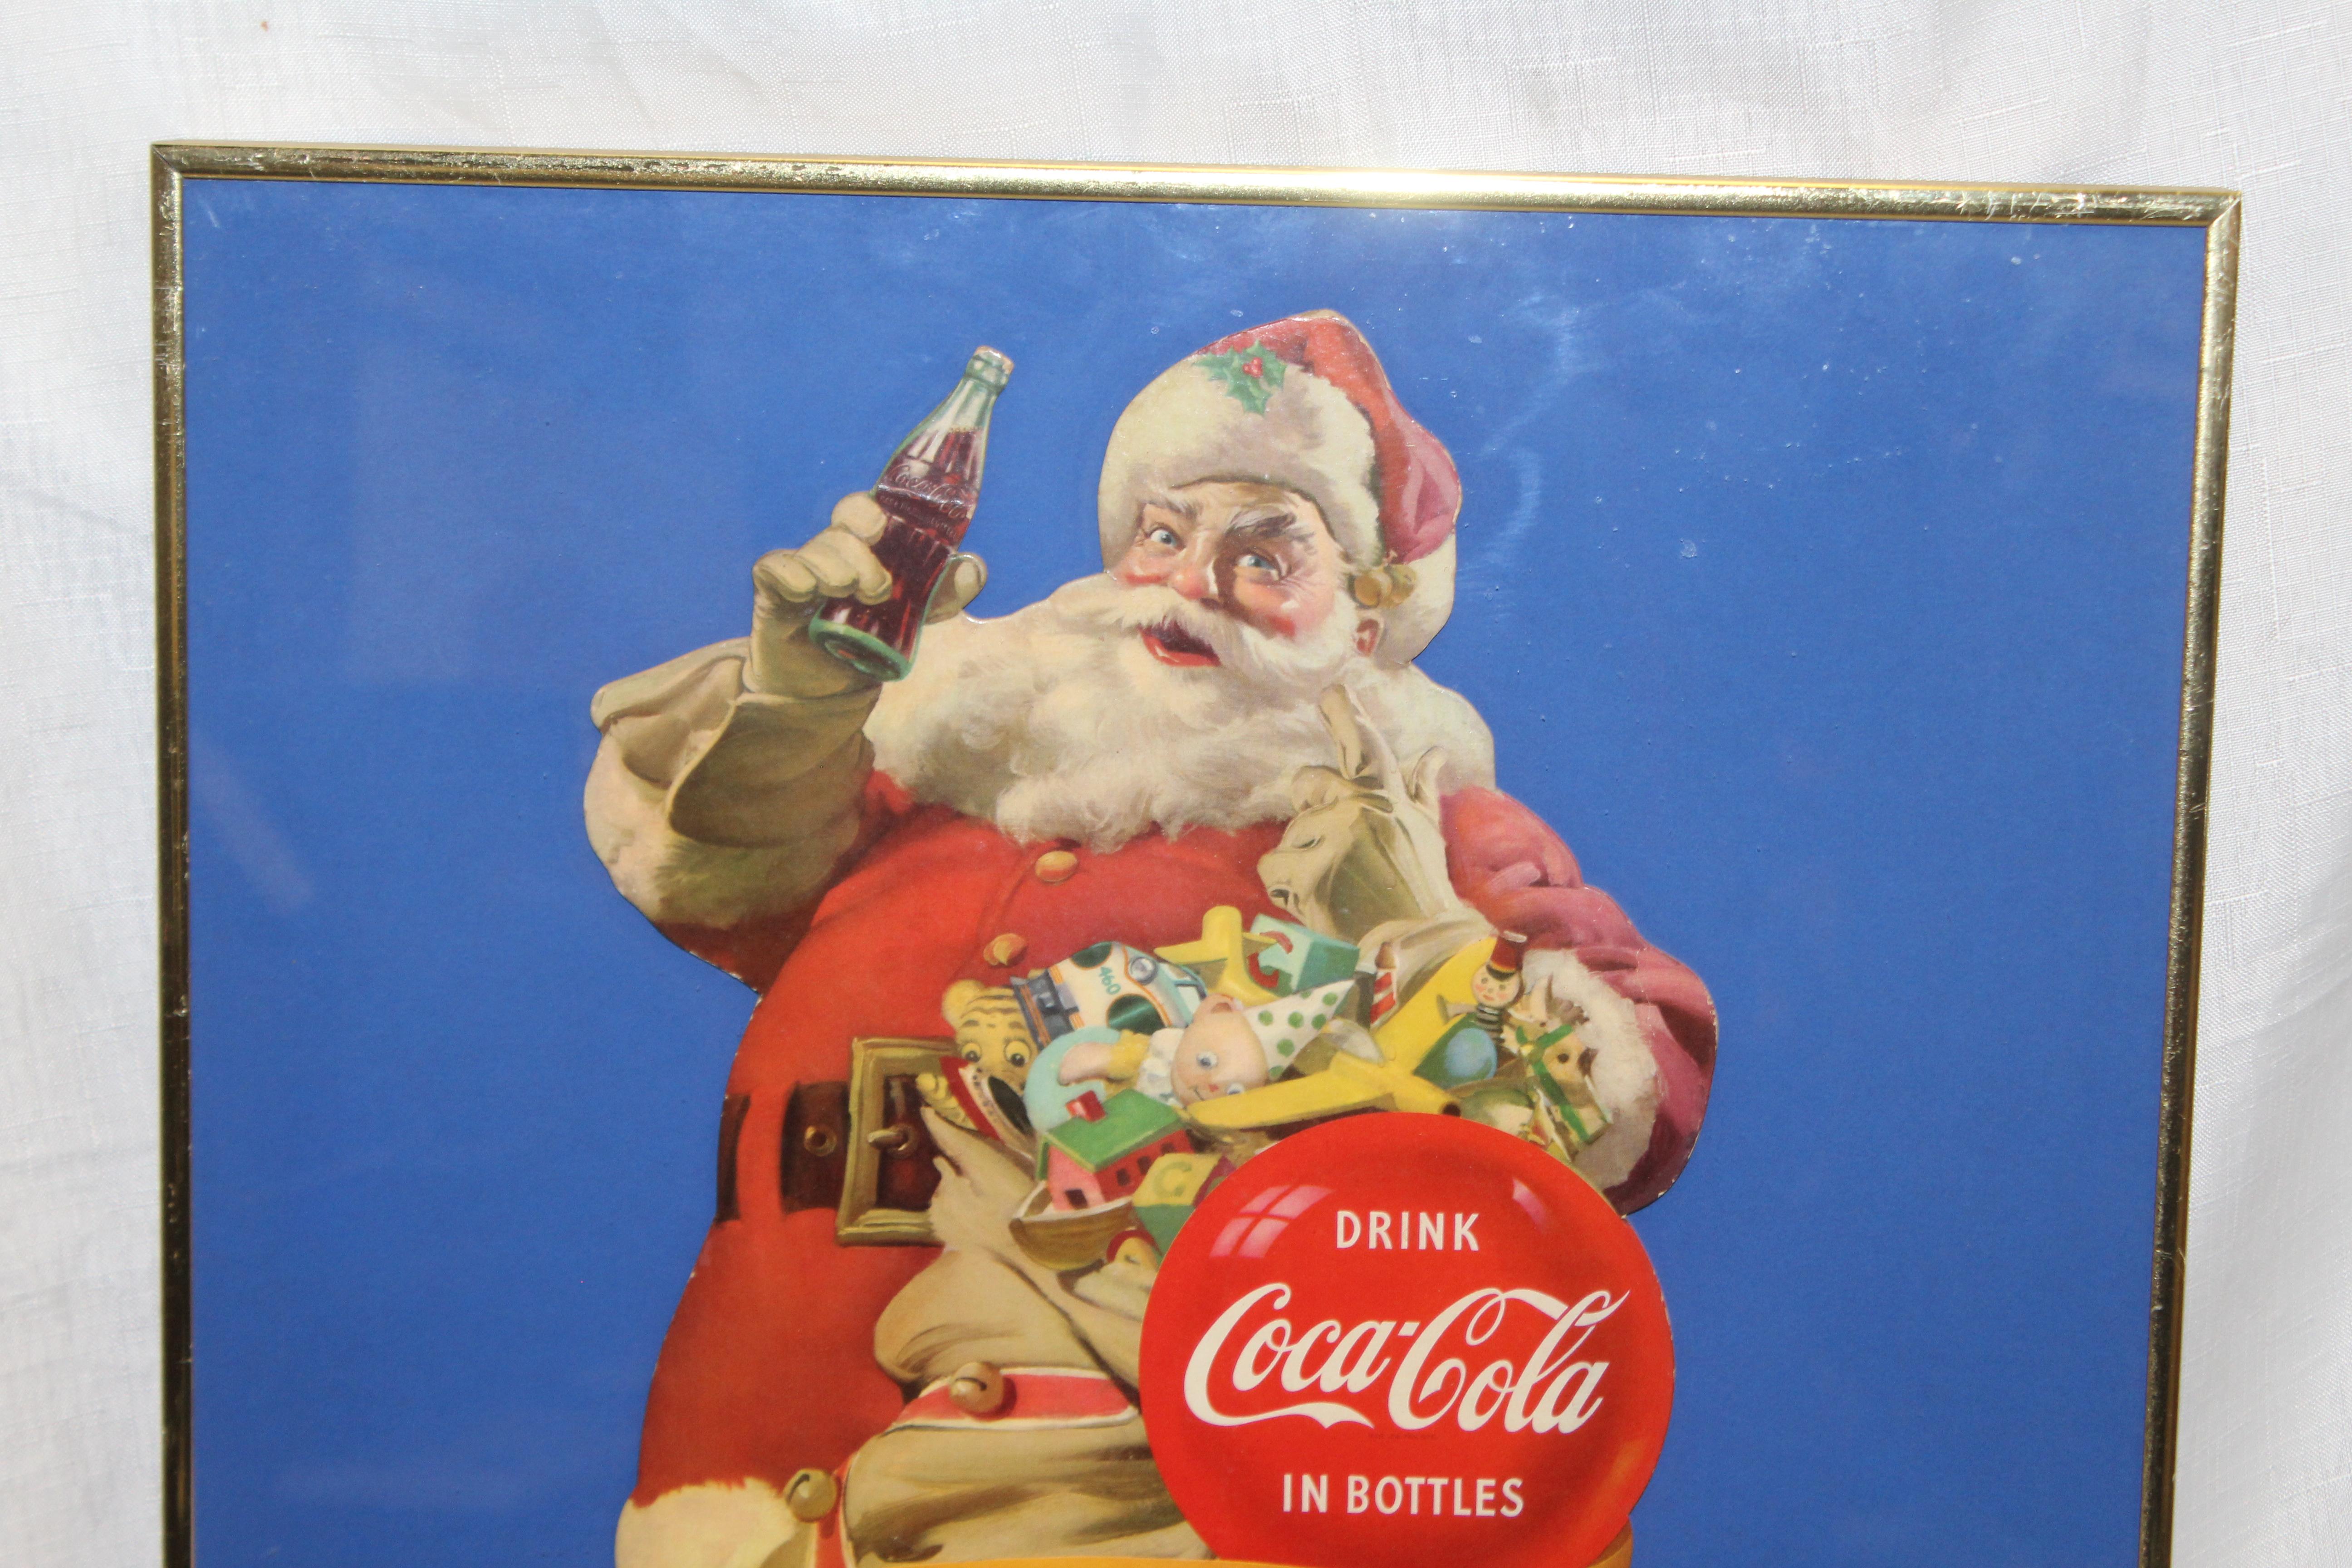 The era of beautiful women on Coca Cola calendars continued well into the 1950s. However other subjects and activities were also sometimes highlighted. Individual bottling companies distributed a series of Boy Scout calendars which were illustrated